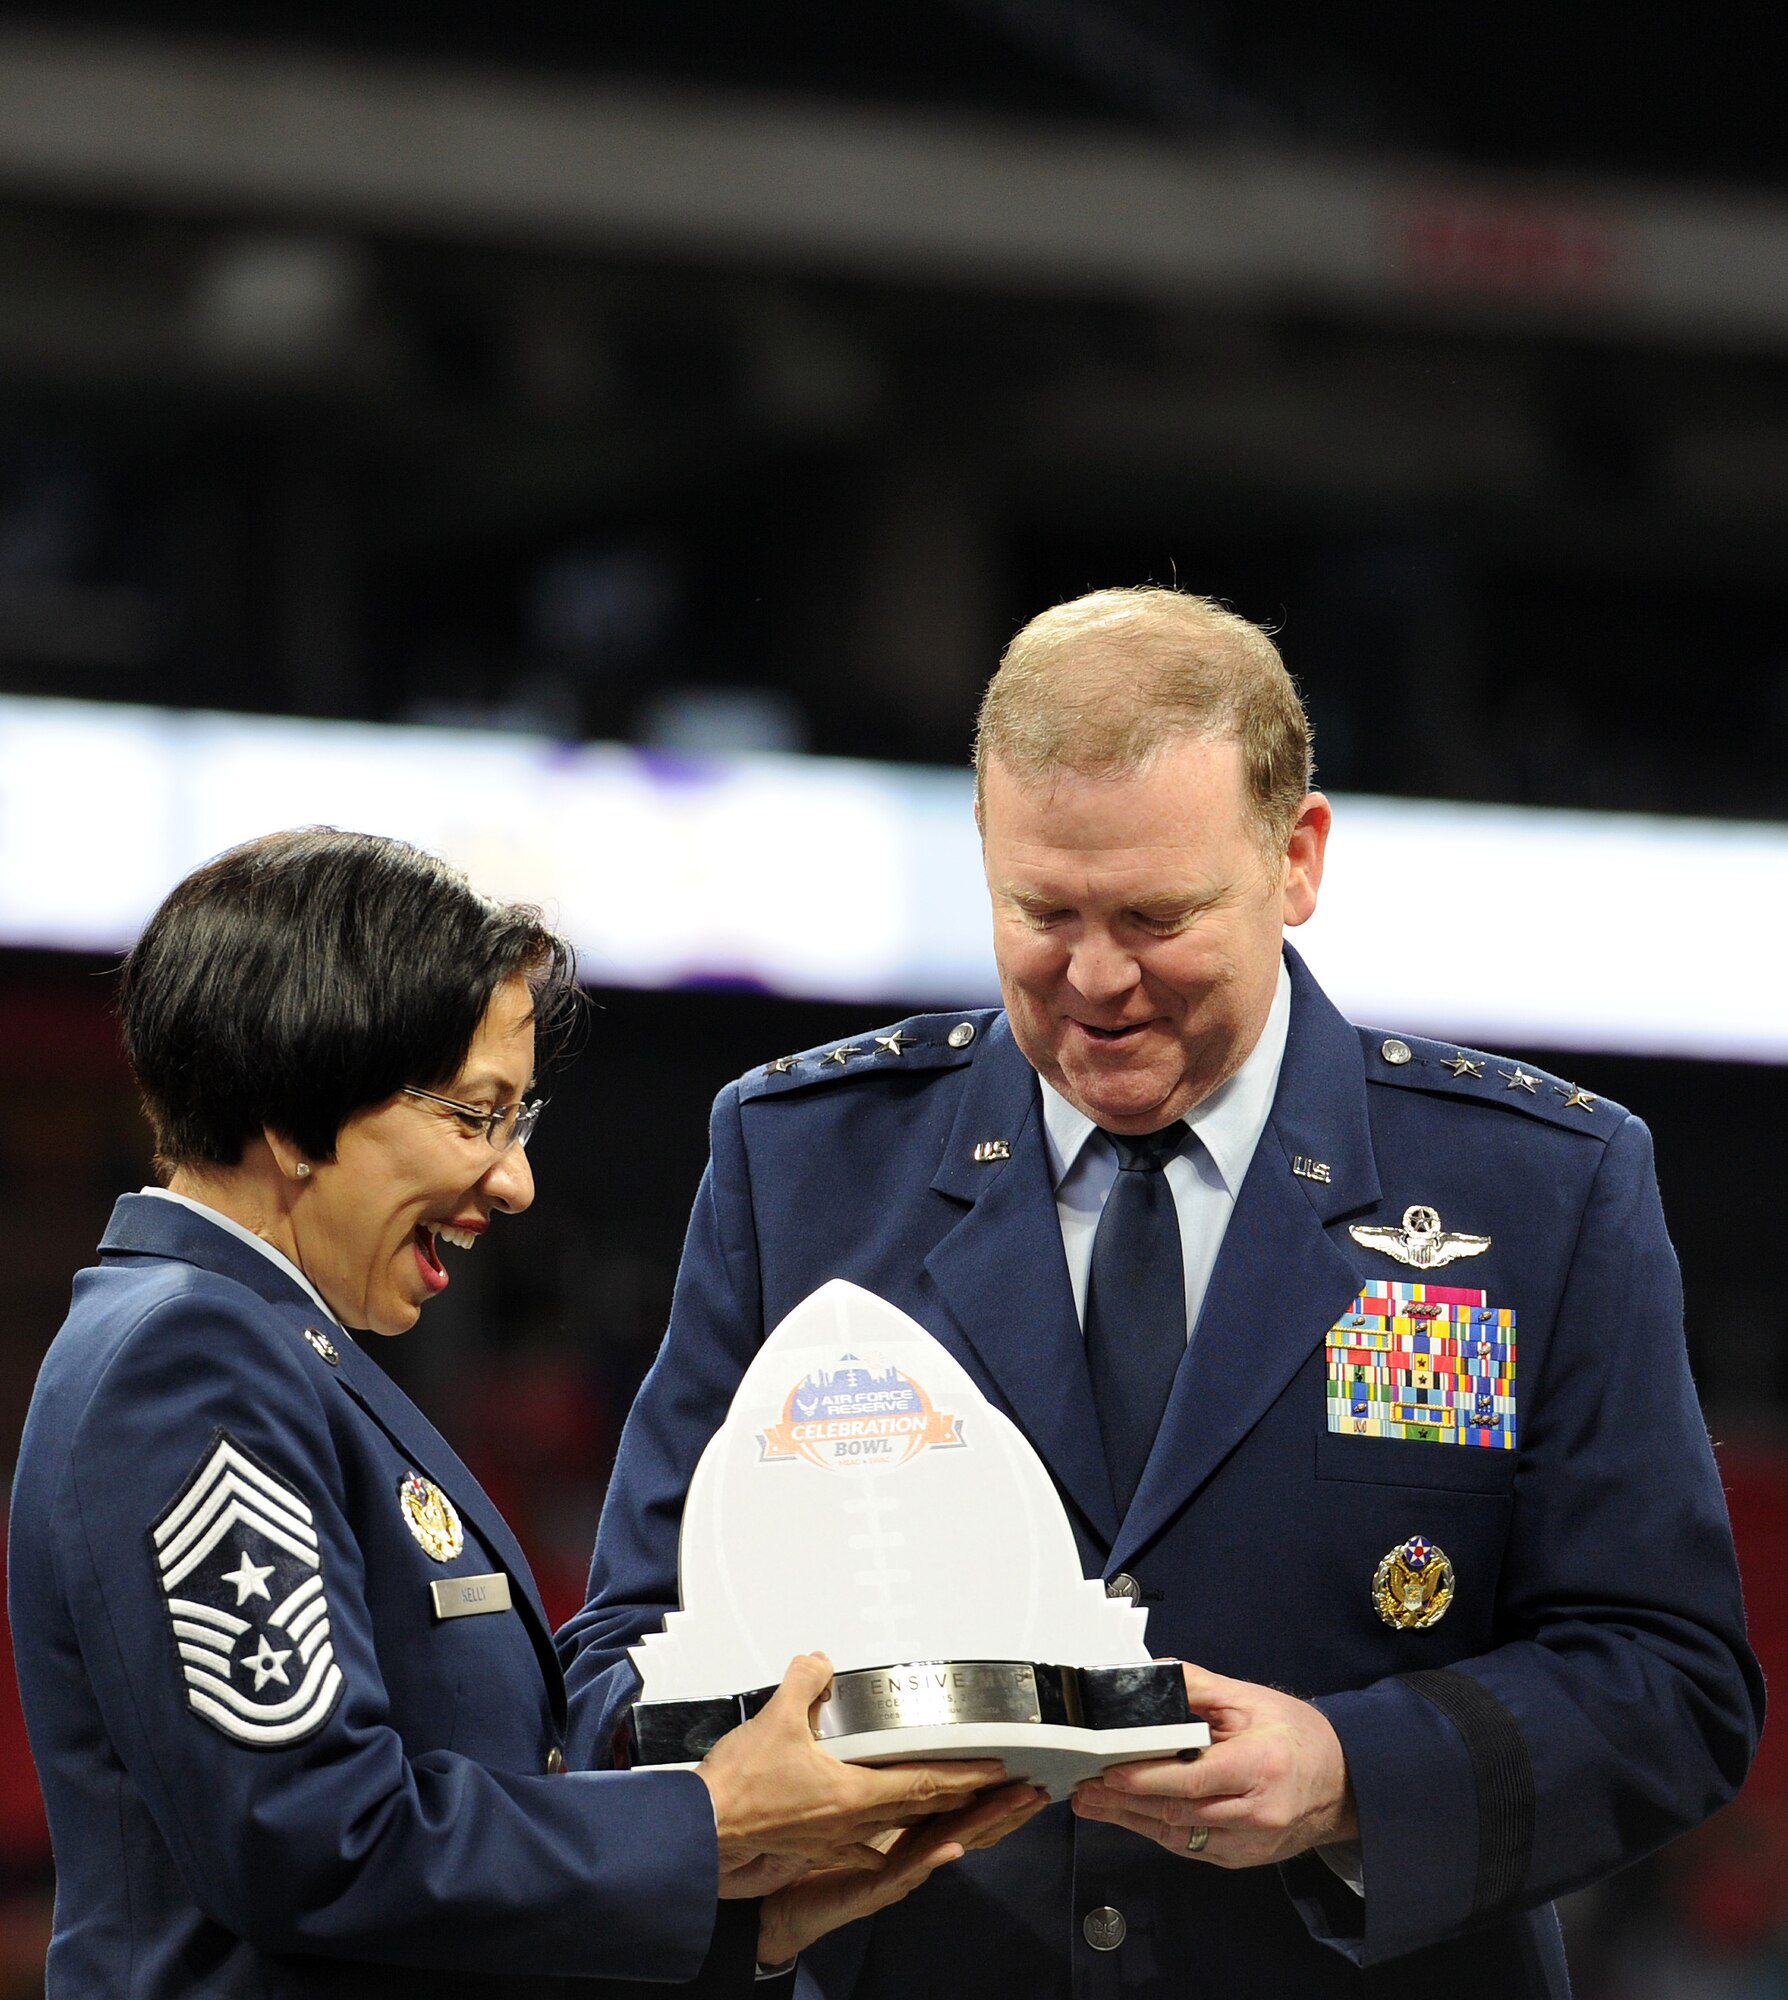 U.S. Air Force Chief Master Sgt. Ericka Kelly, Command Chief, Air Force Reserve Command and U.S. Air Force Lt. Gen. Richard W. Scobee, Commander, AFRC, hold the Offensive Most Valuable Player Award for the Air Force Reserve Celebration Bowl before presenting it to the recipient at the conclusion of the game at Mercedes-Benz Stadium in Atlanta, Georgia, December 15, 2018. (U.S. Air Force photo by Master Sgt. Stephen D. Schester)